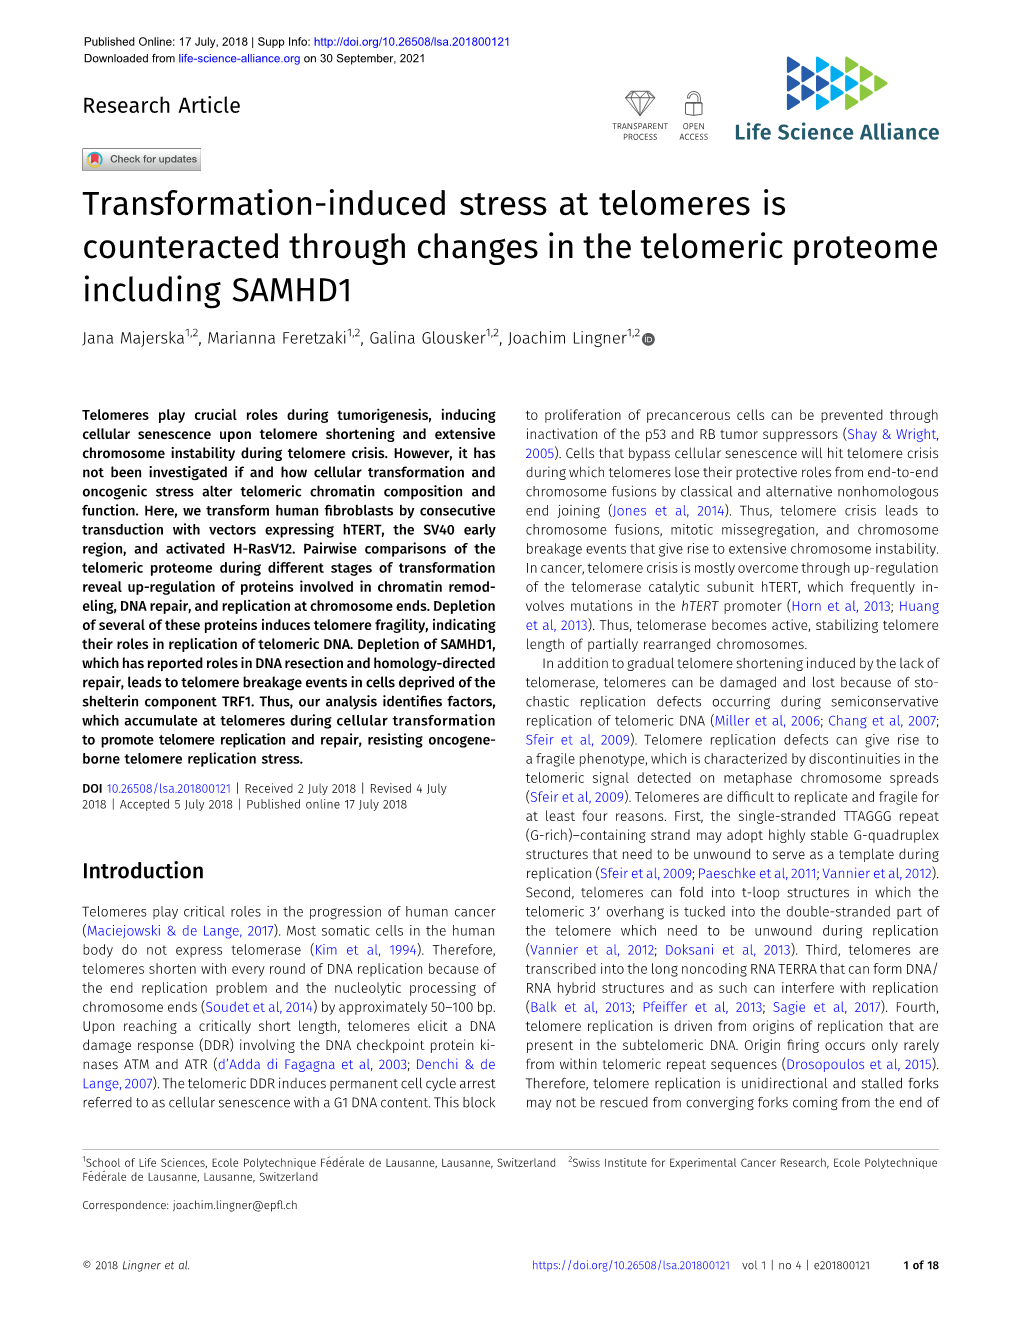 Transformation-Induced Stress at Telomeres Is Counteracted Through Changes in the Telomeric Proteome Including SAMHD1